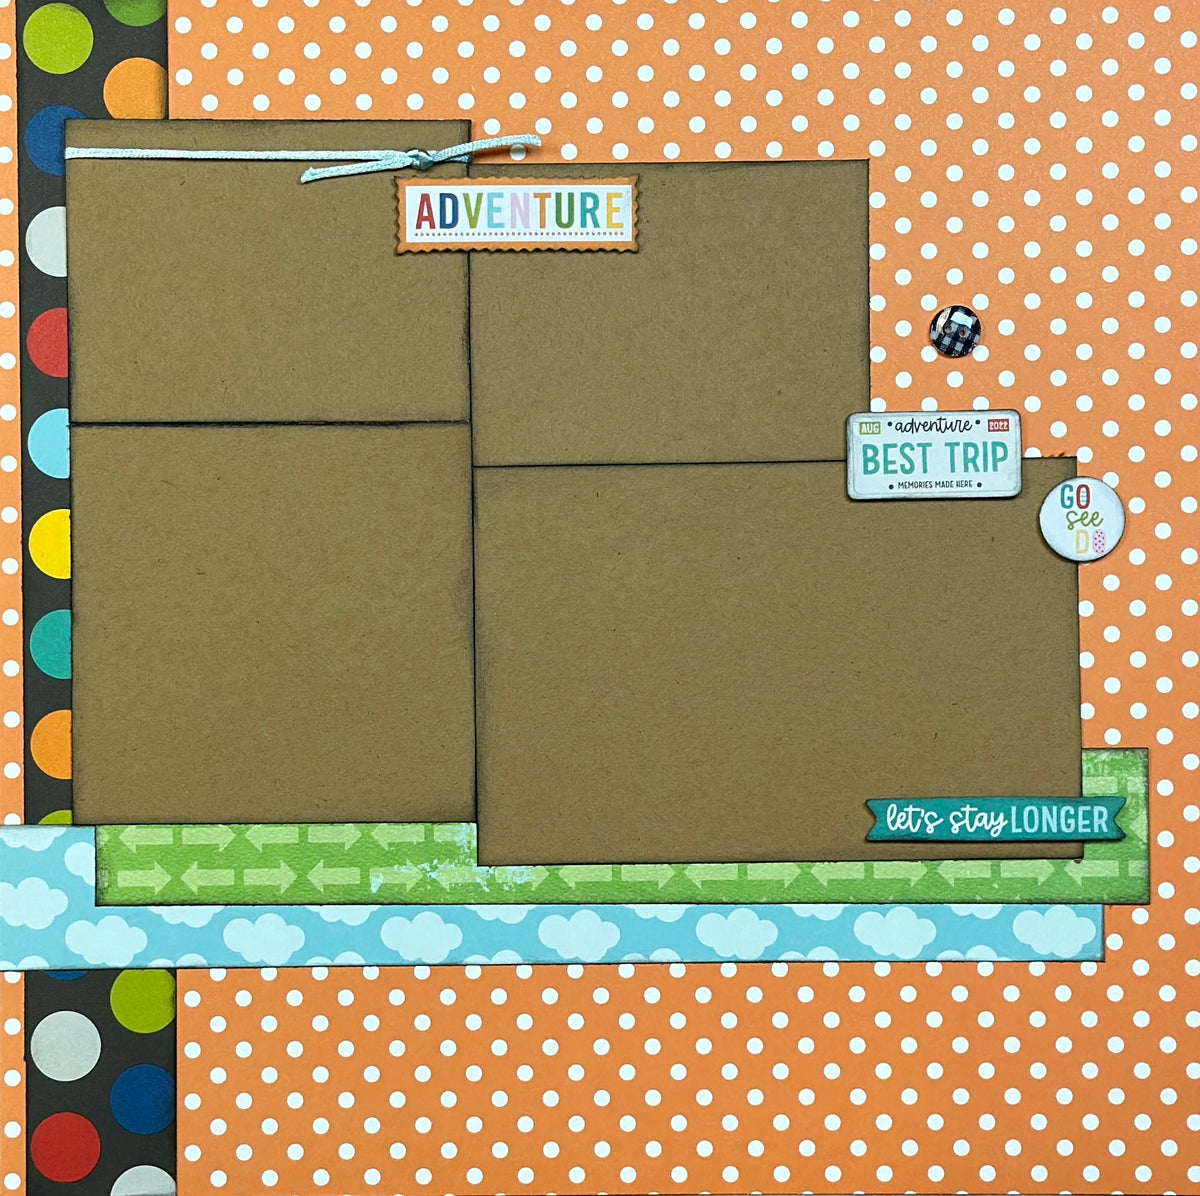 Adventure - All Packed Up, Travel themed 2 page Scrapbooking